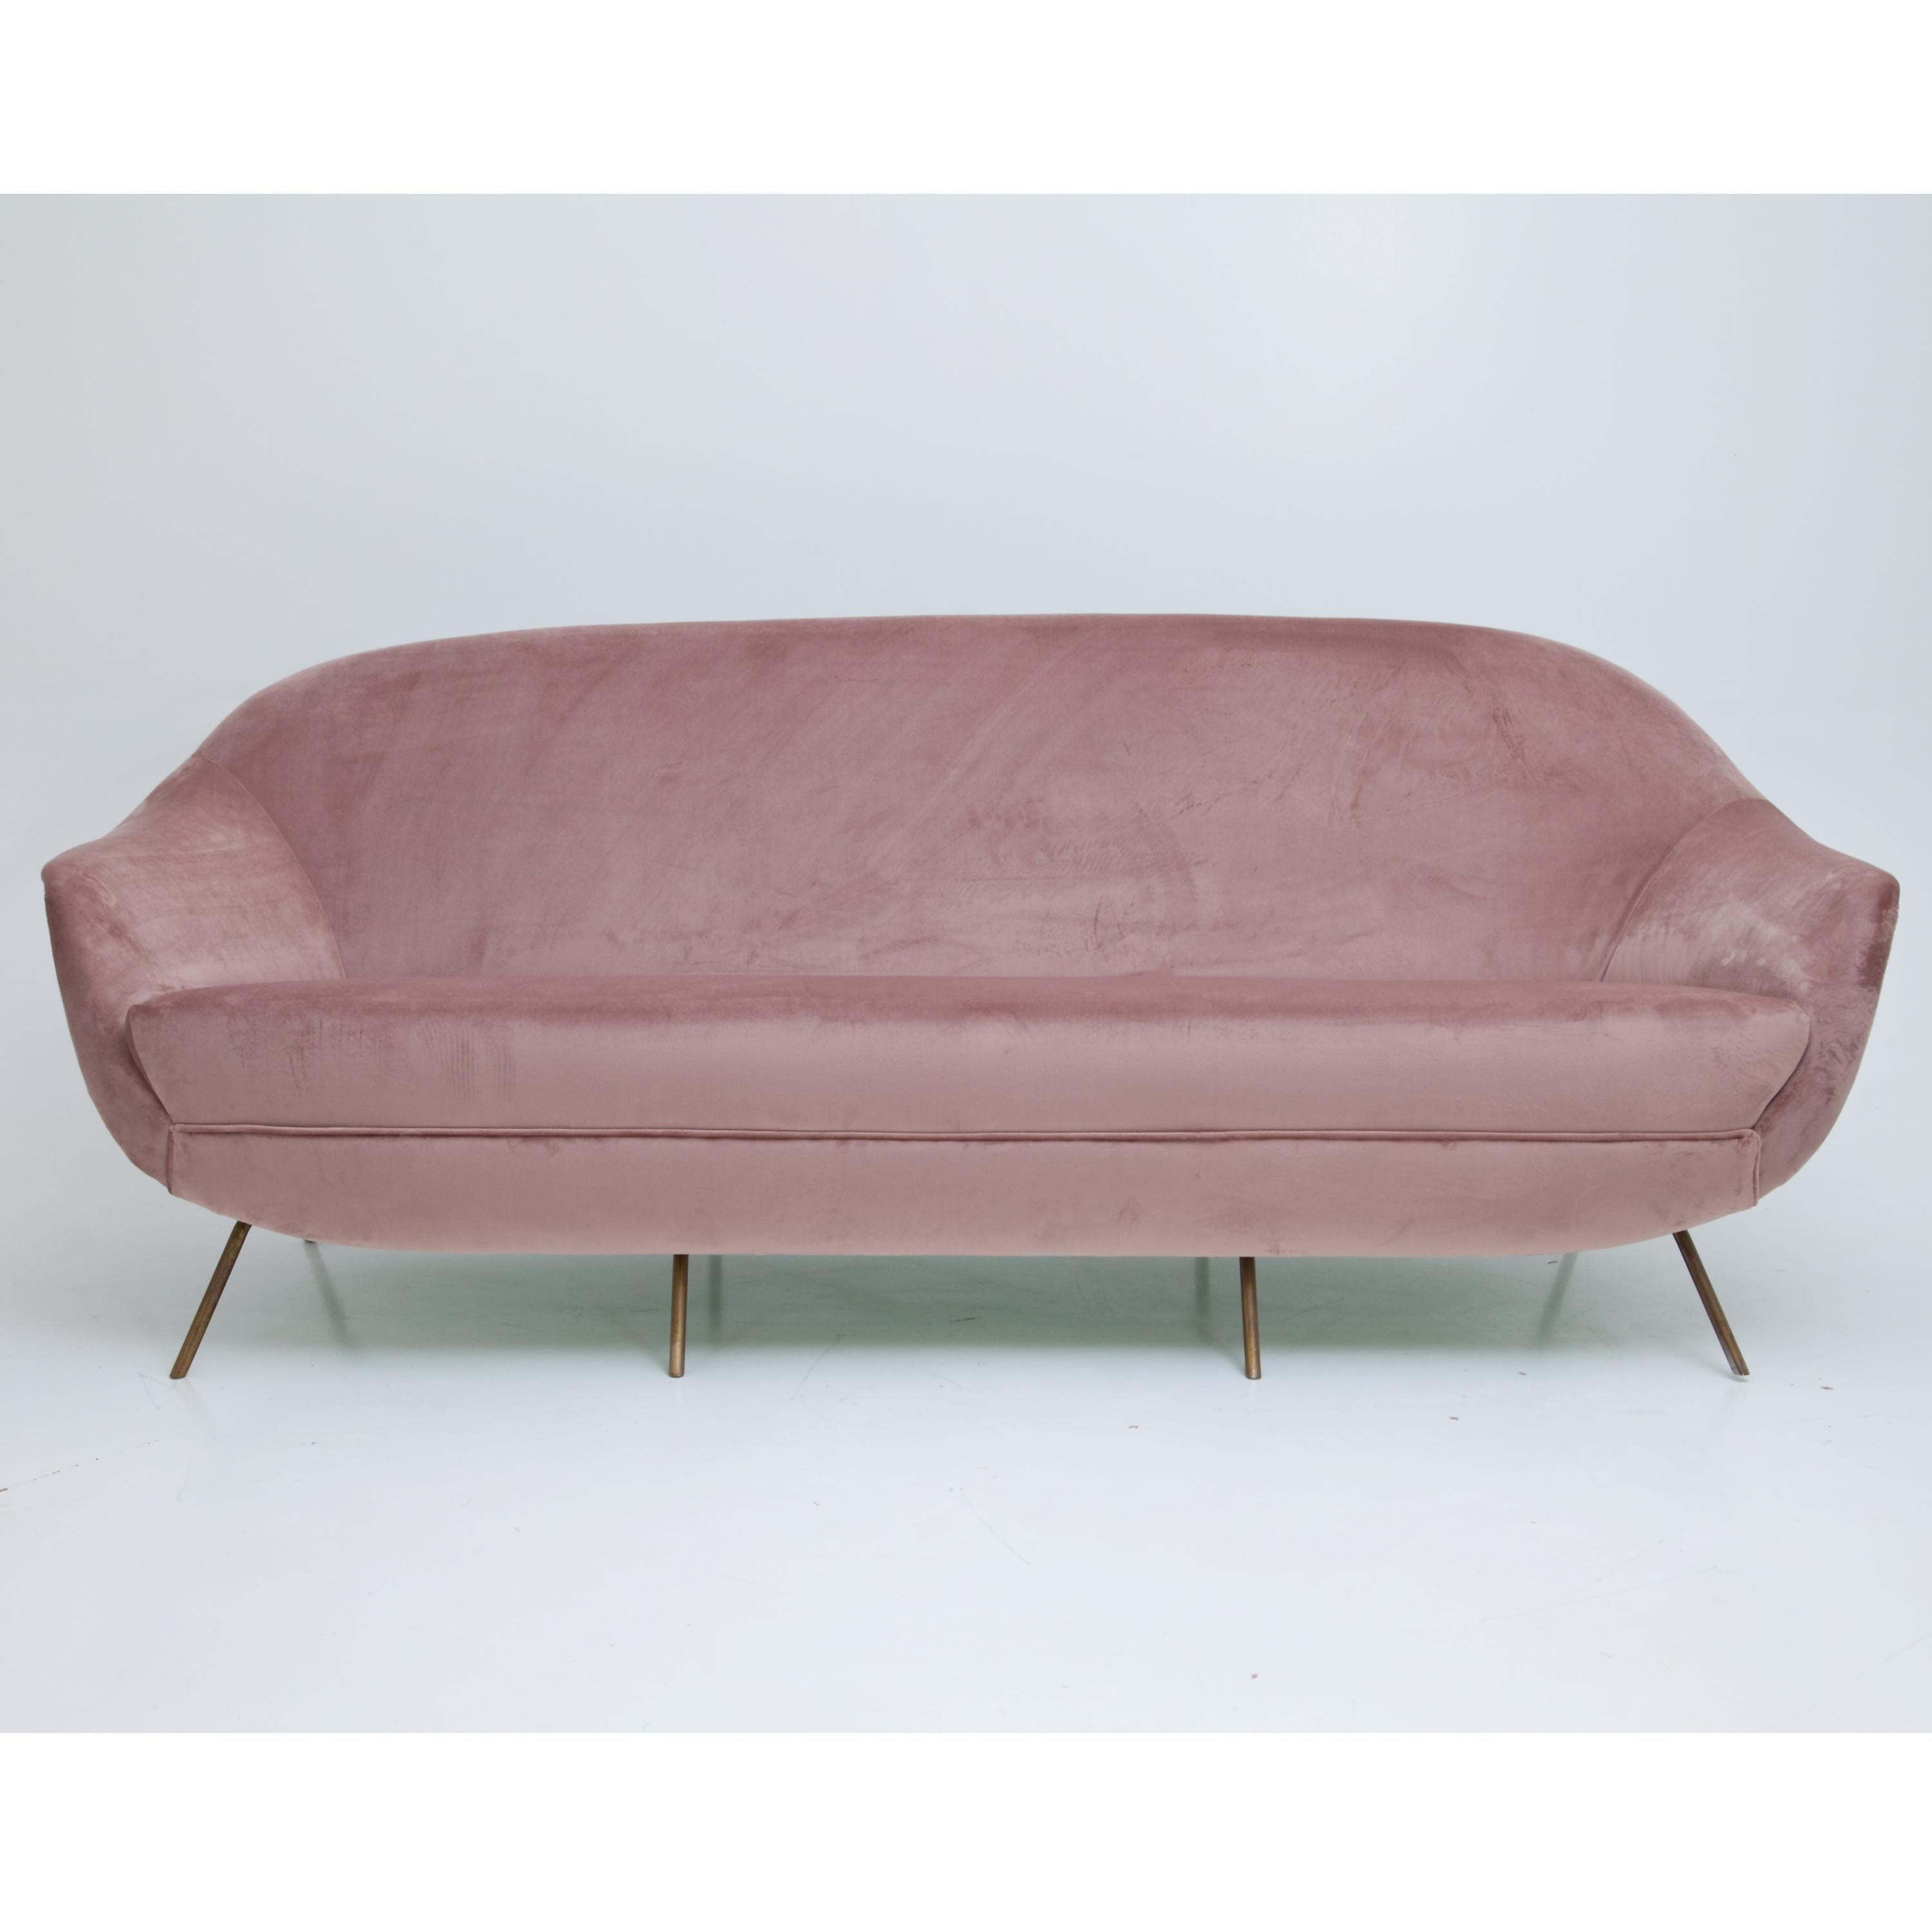 Three-seat sofa on brass legs. The sofa was newly upholstered with a high-quality fabric in a soft rose color and grey.
        